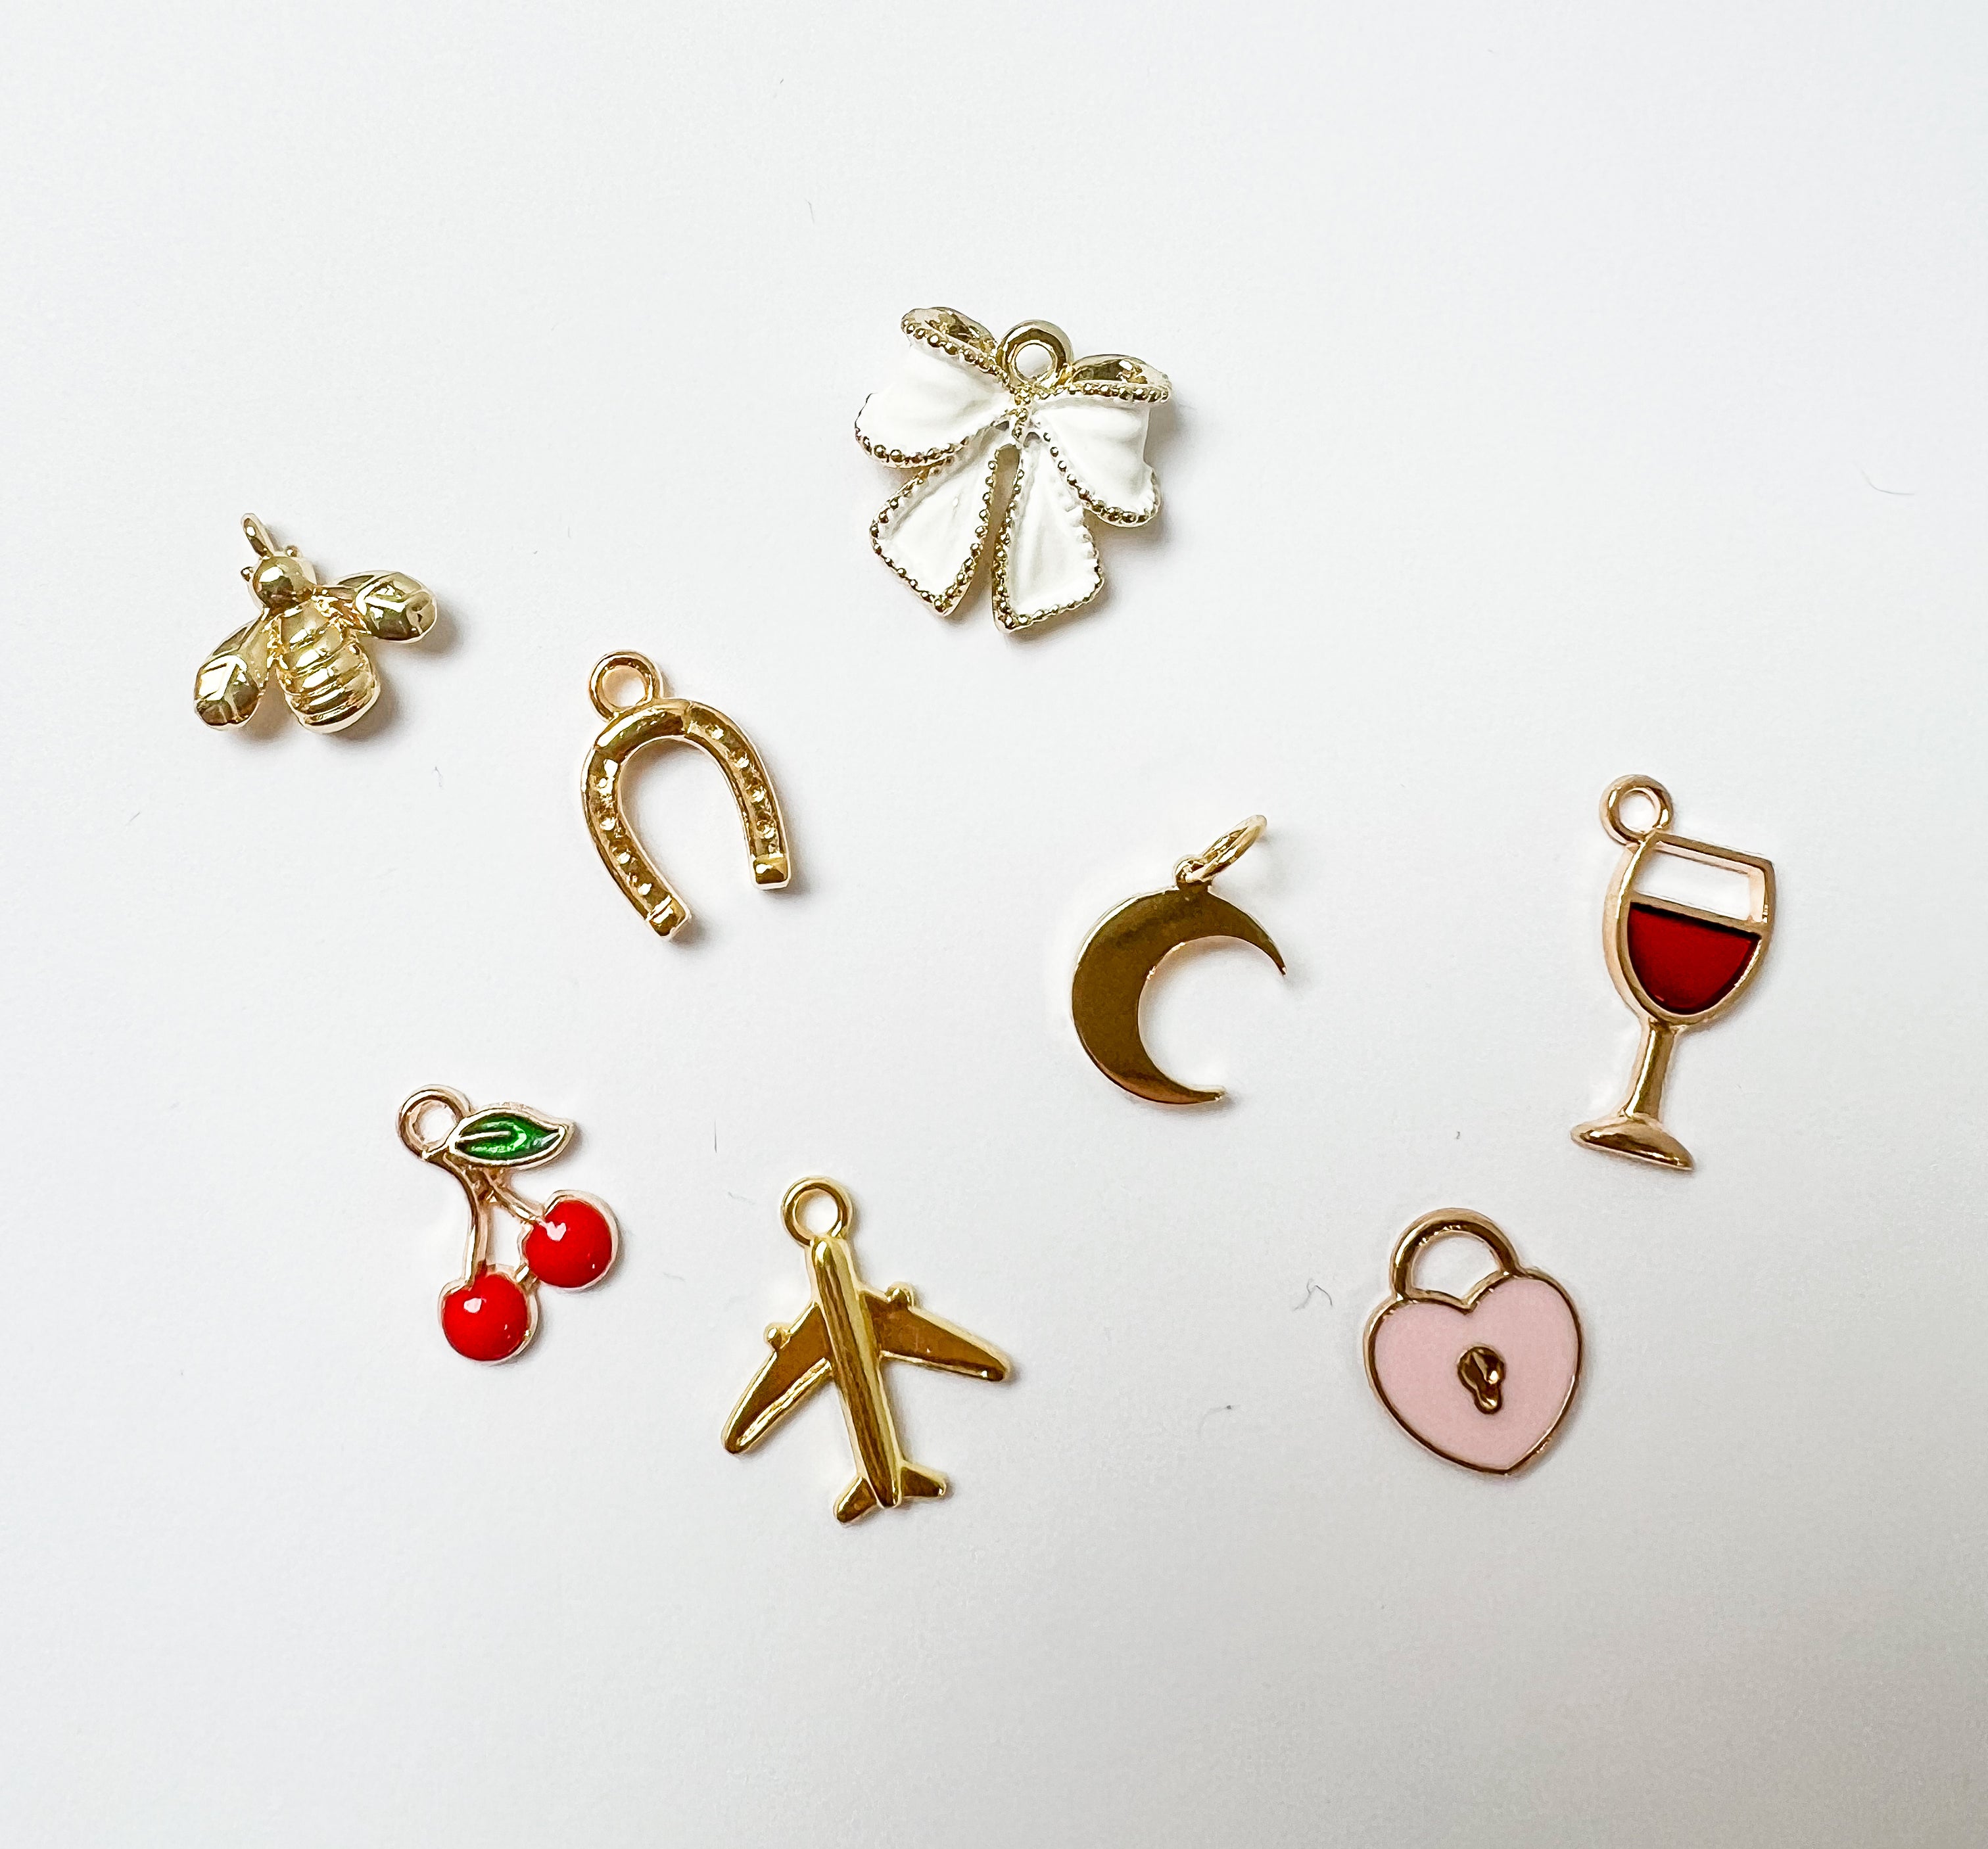 Choose your charms: Pretty touches